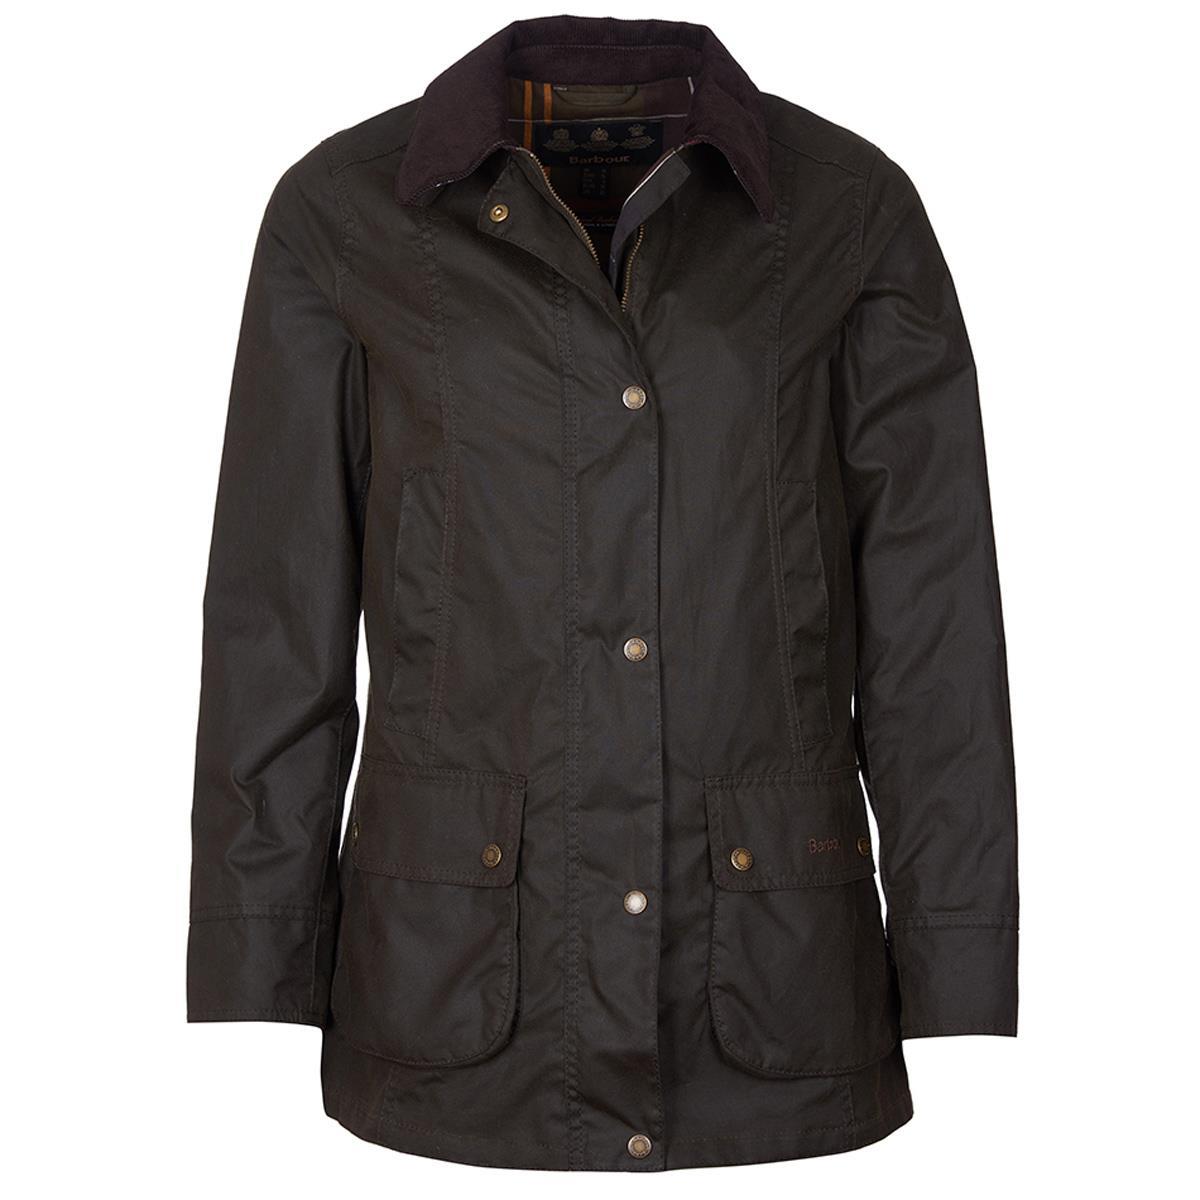 What features does the Barbour Fiddich Women's Wax Jacket have to stay buttoned in windy weather?